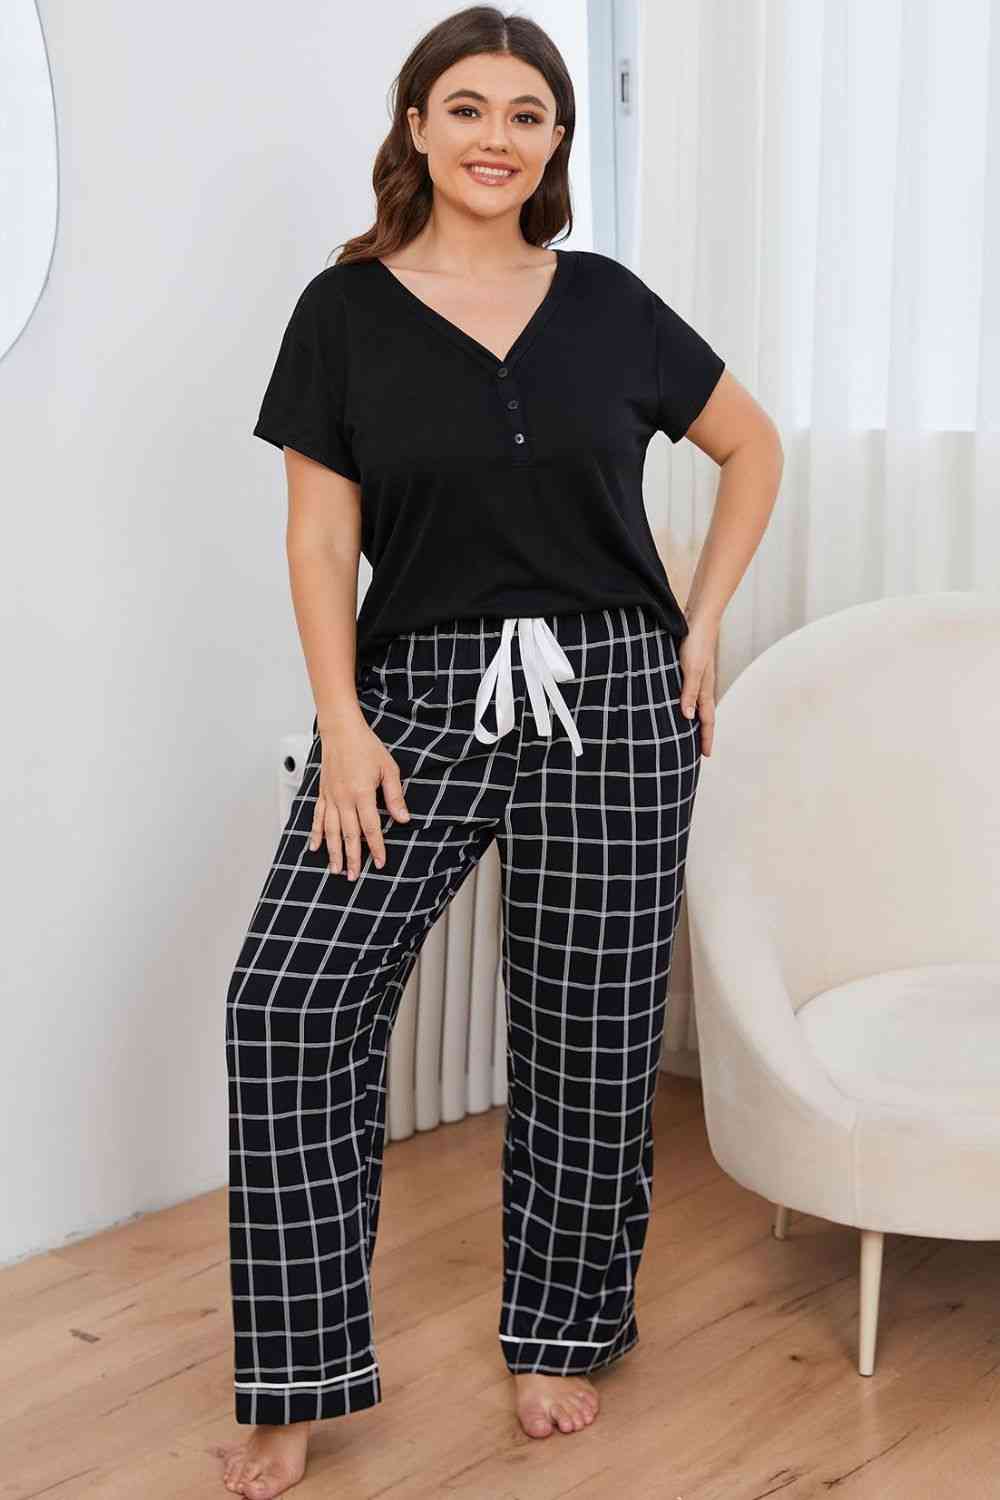 Plus Size V-Neck Top and Plaid Pants Lounge Set - Sufyaa